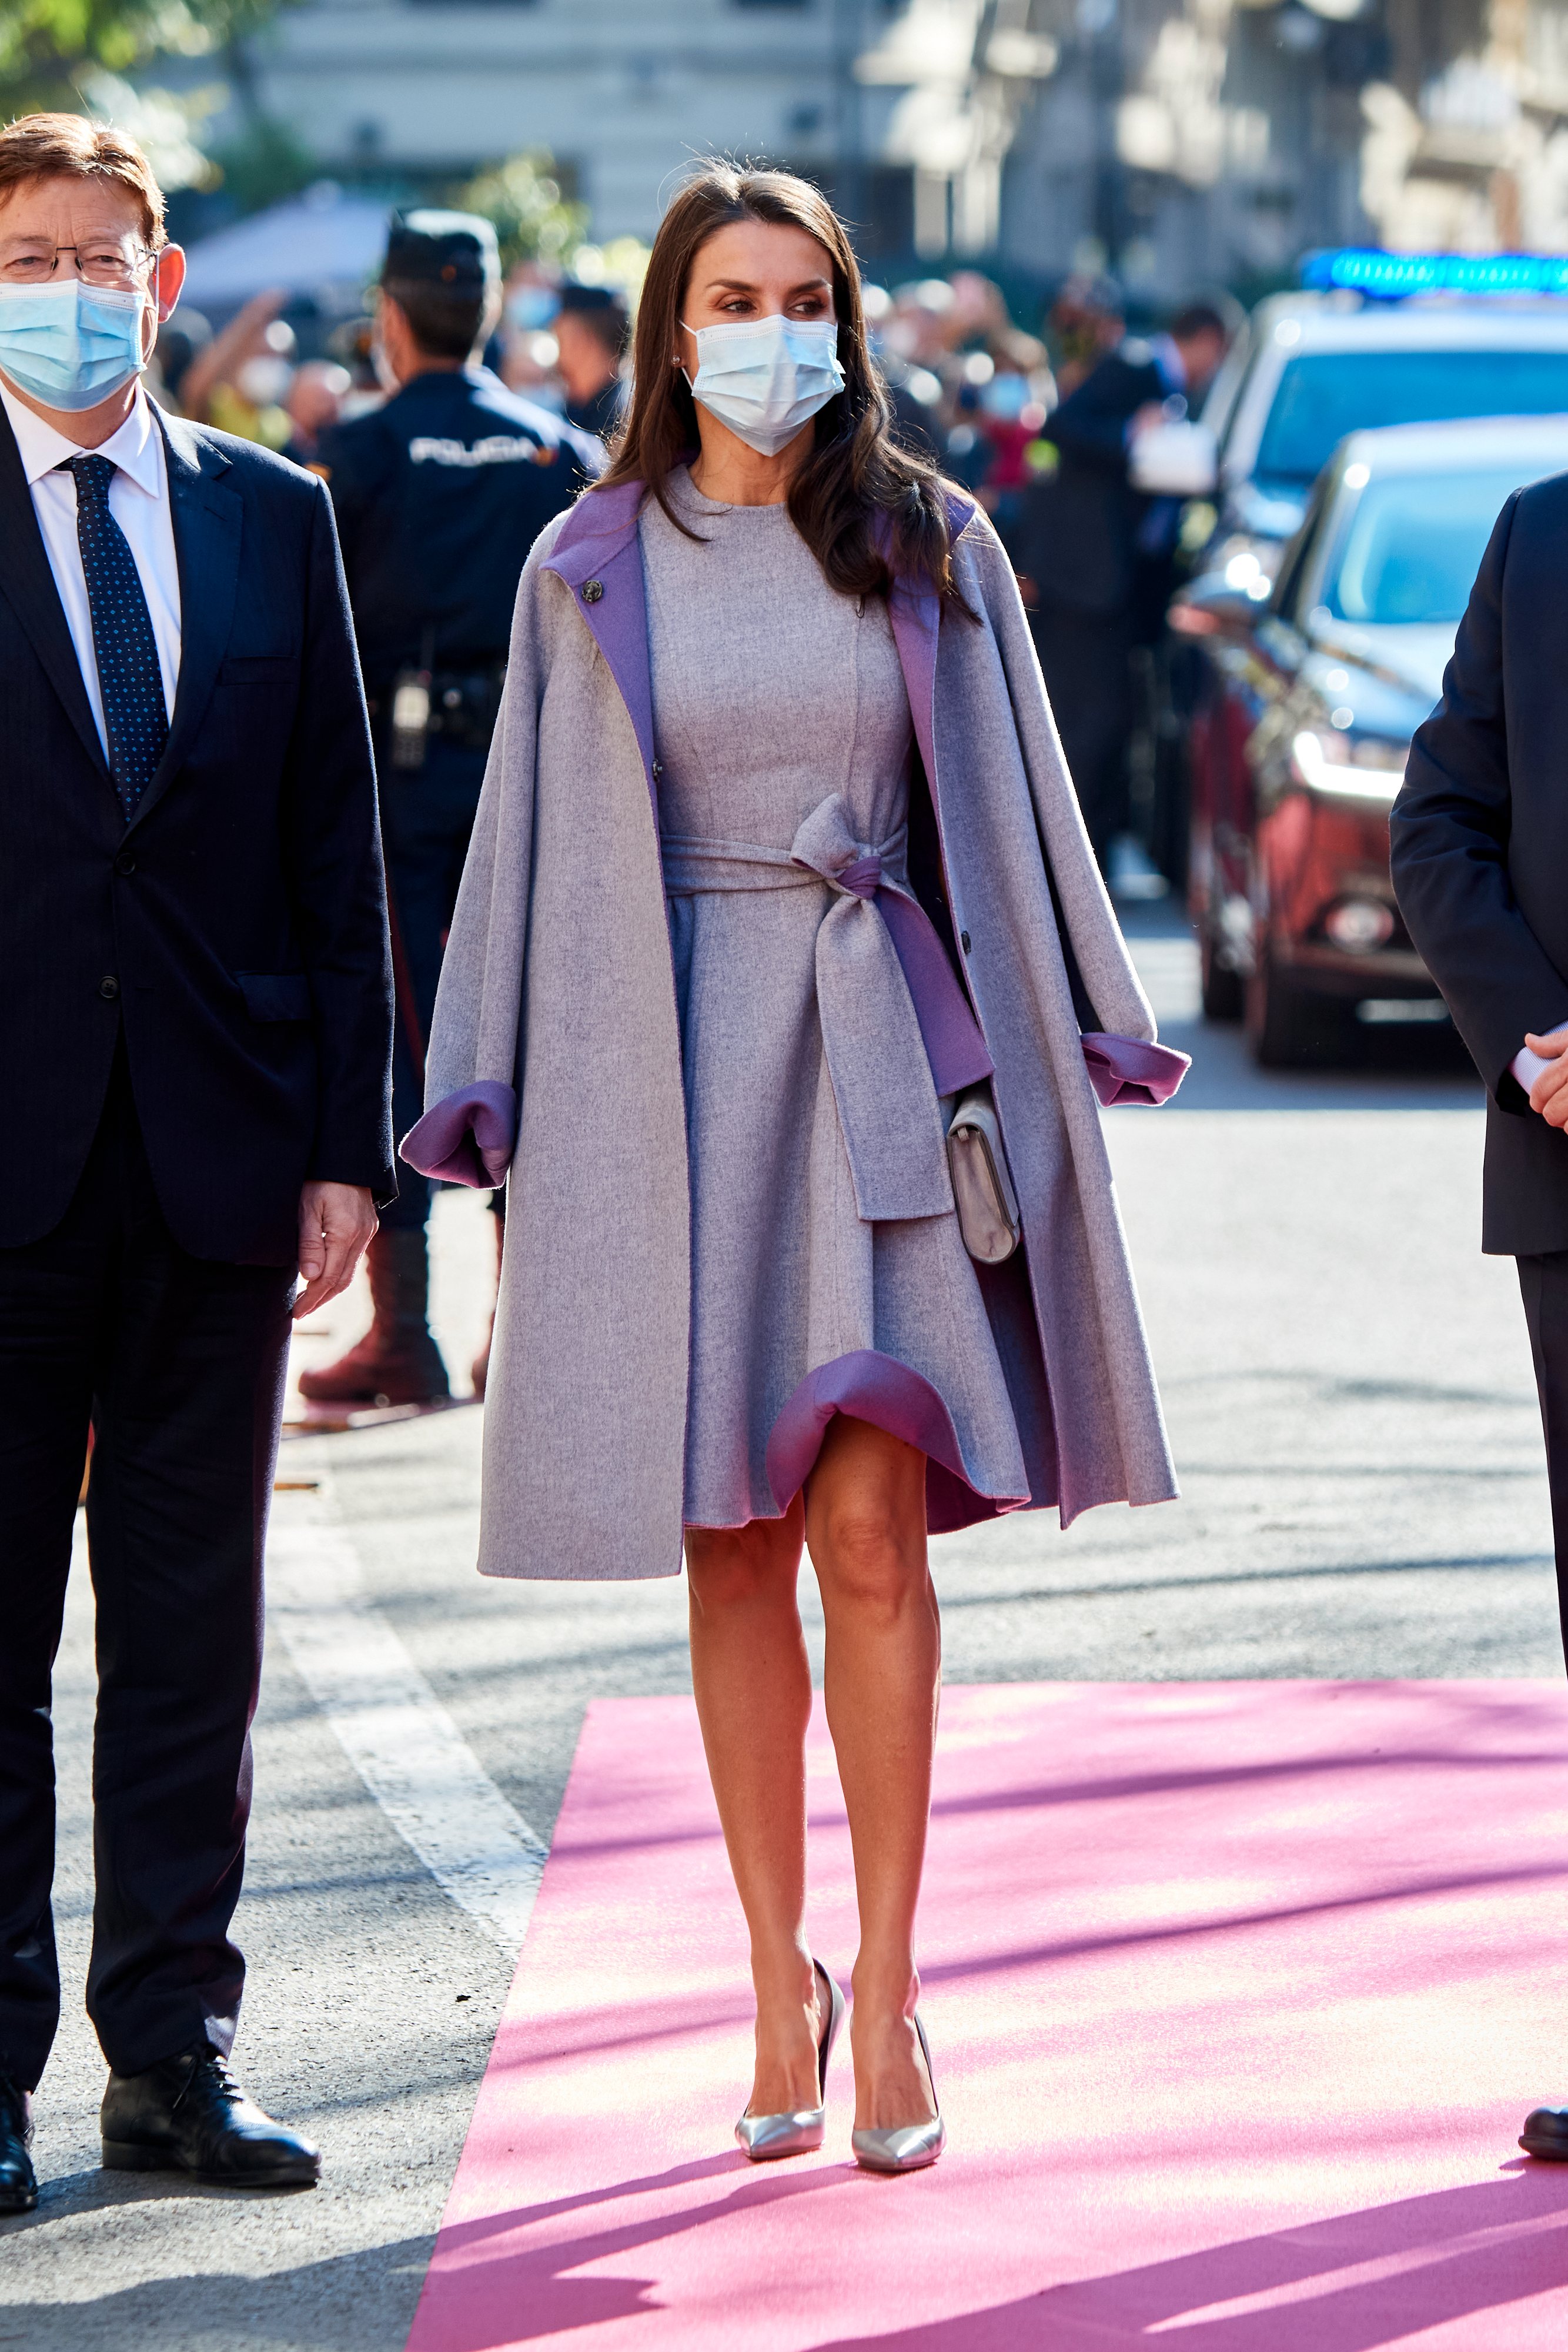 Queen Letizia Of Spain Arrives At The &#039;Jaume I&#039; Awards In Valencia